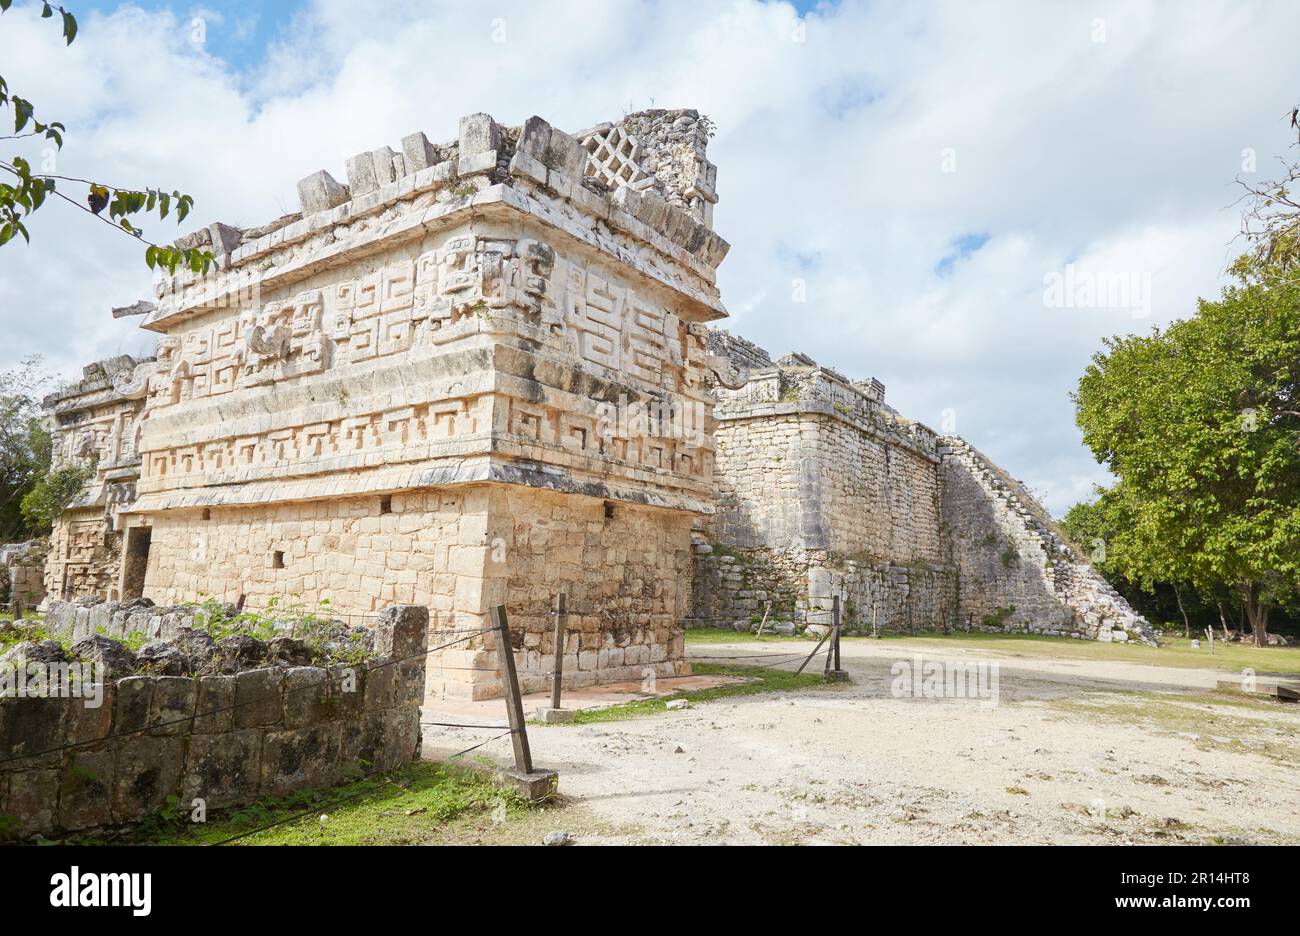 Chichen Itza One Of The Greatest Ancient Mayan Cities Is Located In Yucatan Mexico Stock